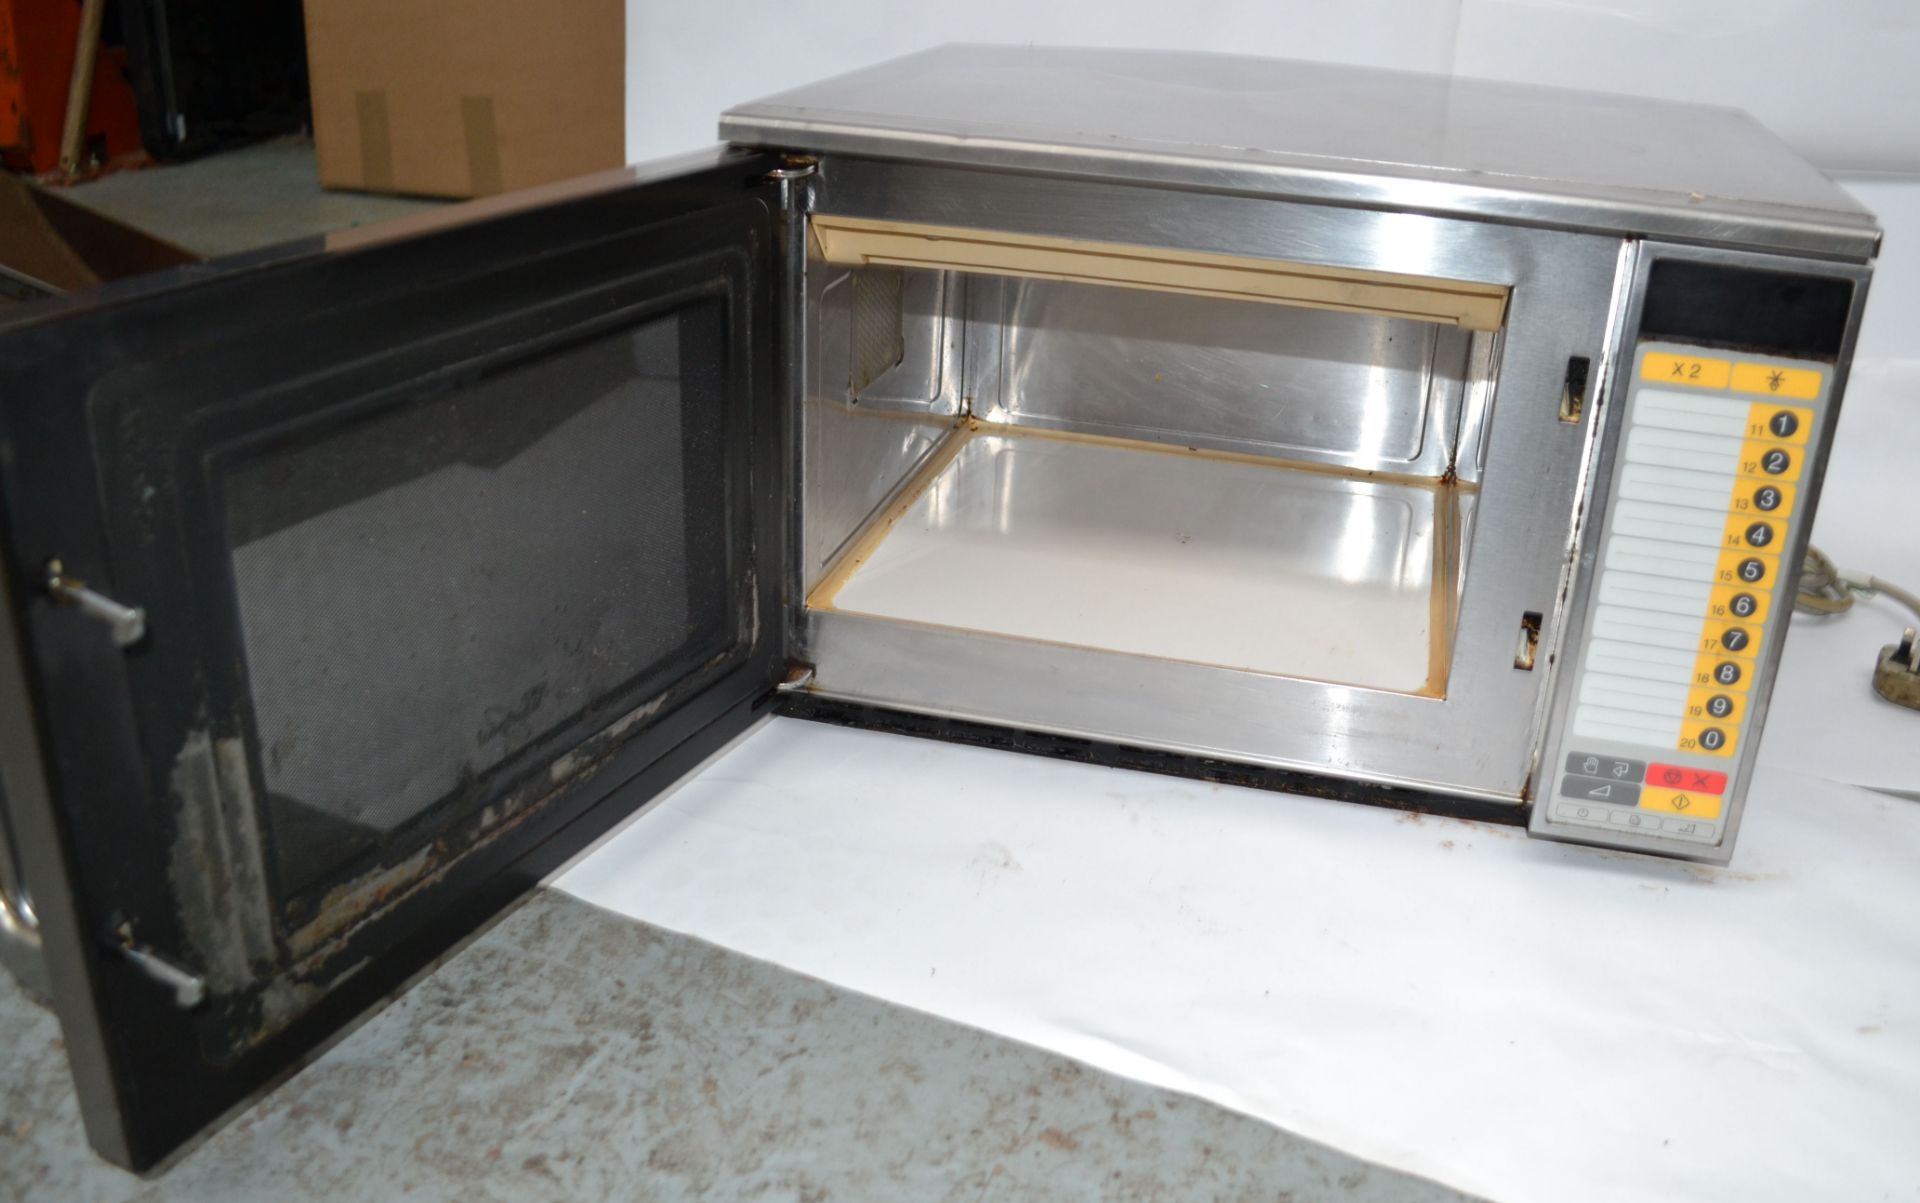 1 x Whirlpool Pro 2502 Stainless Steel 1200W Microwave - Ref: NCE010 - CL007 - Location: Altrincham - Image 3 of 8